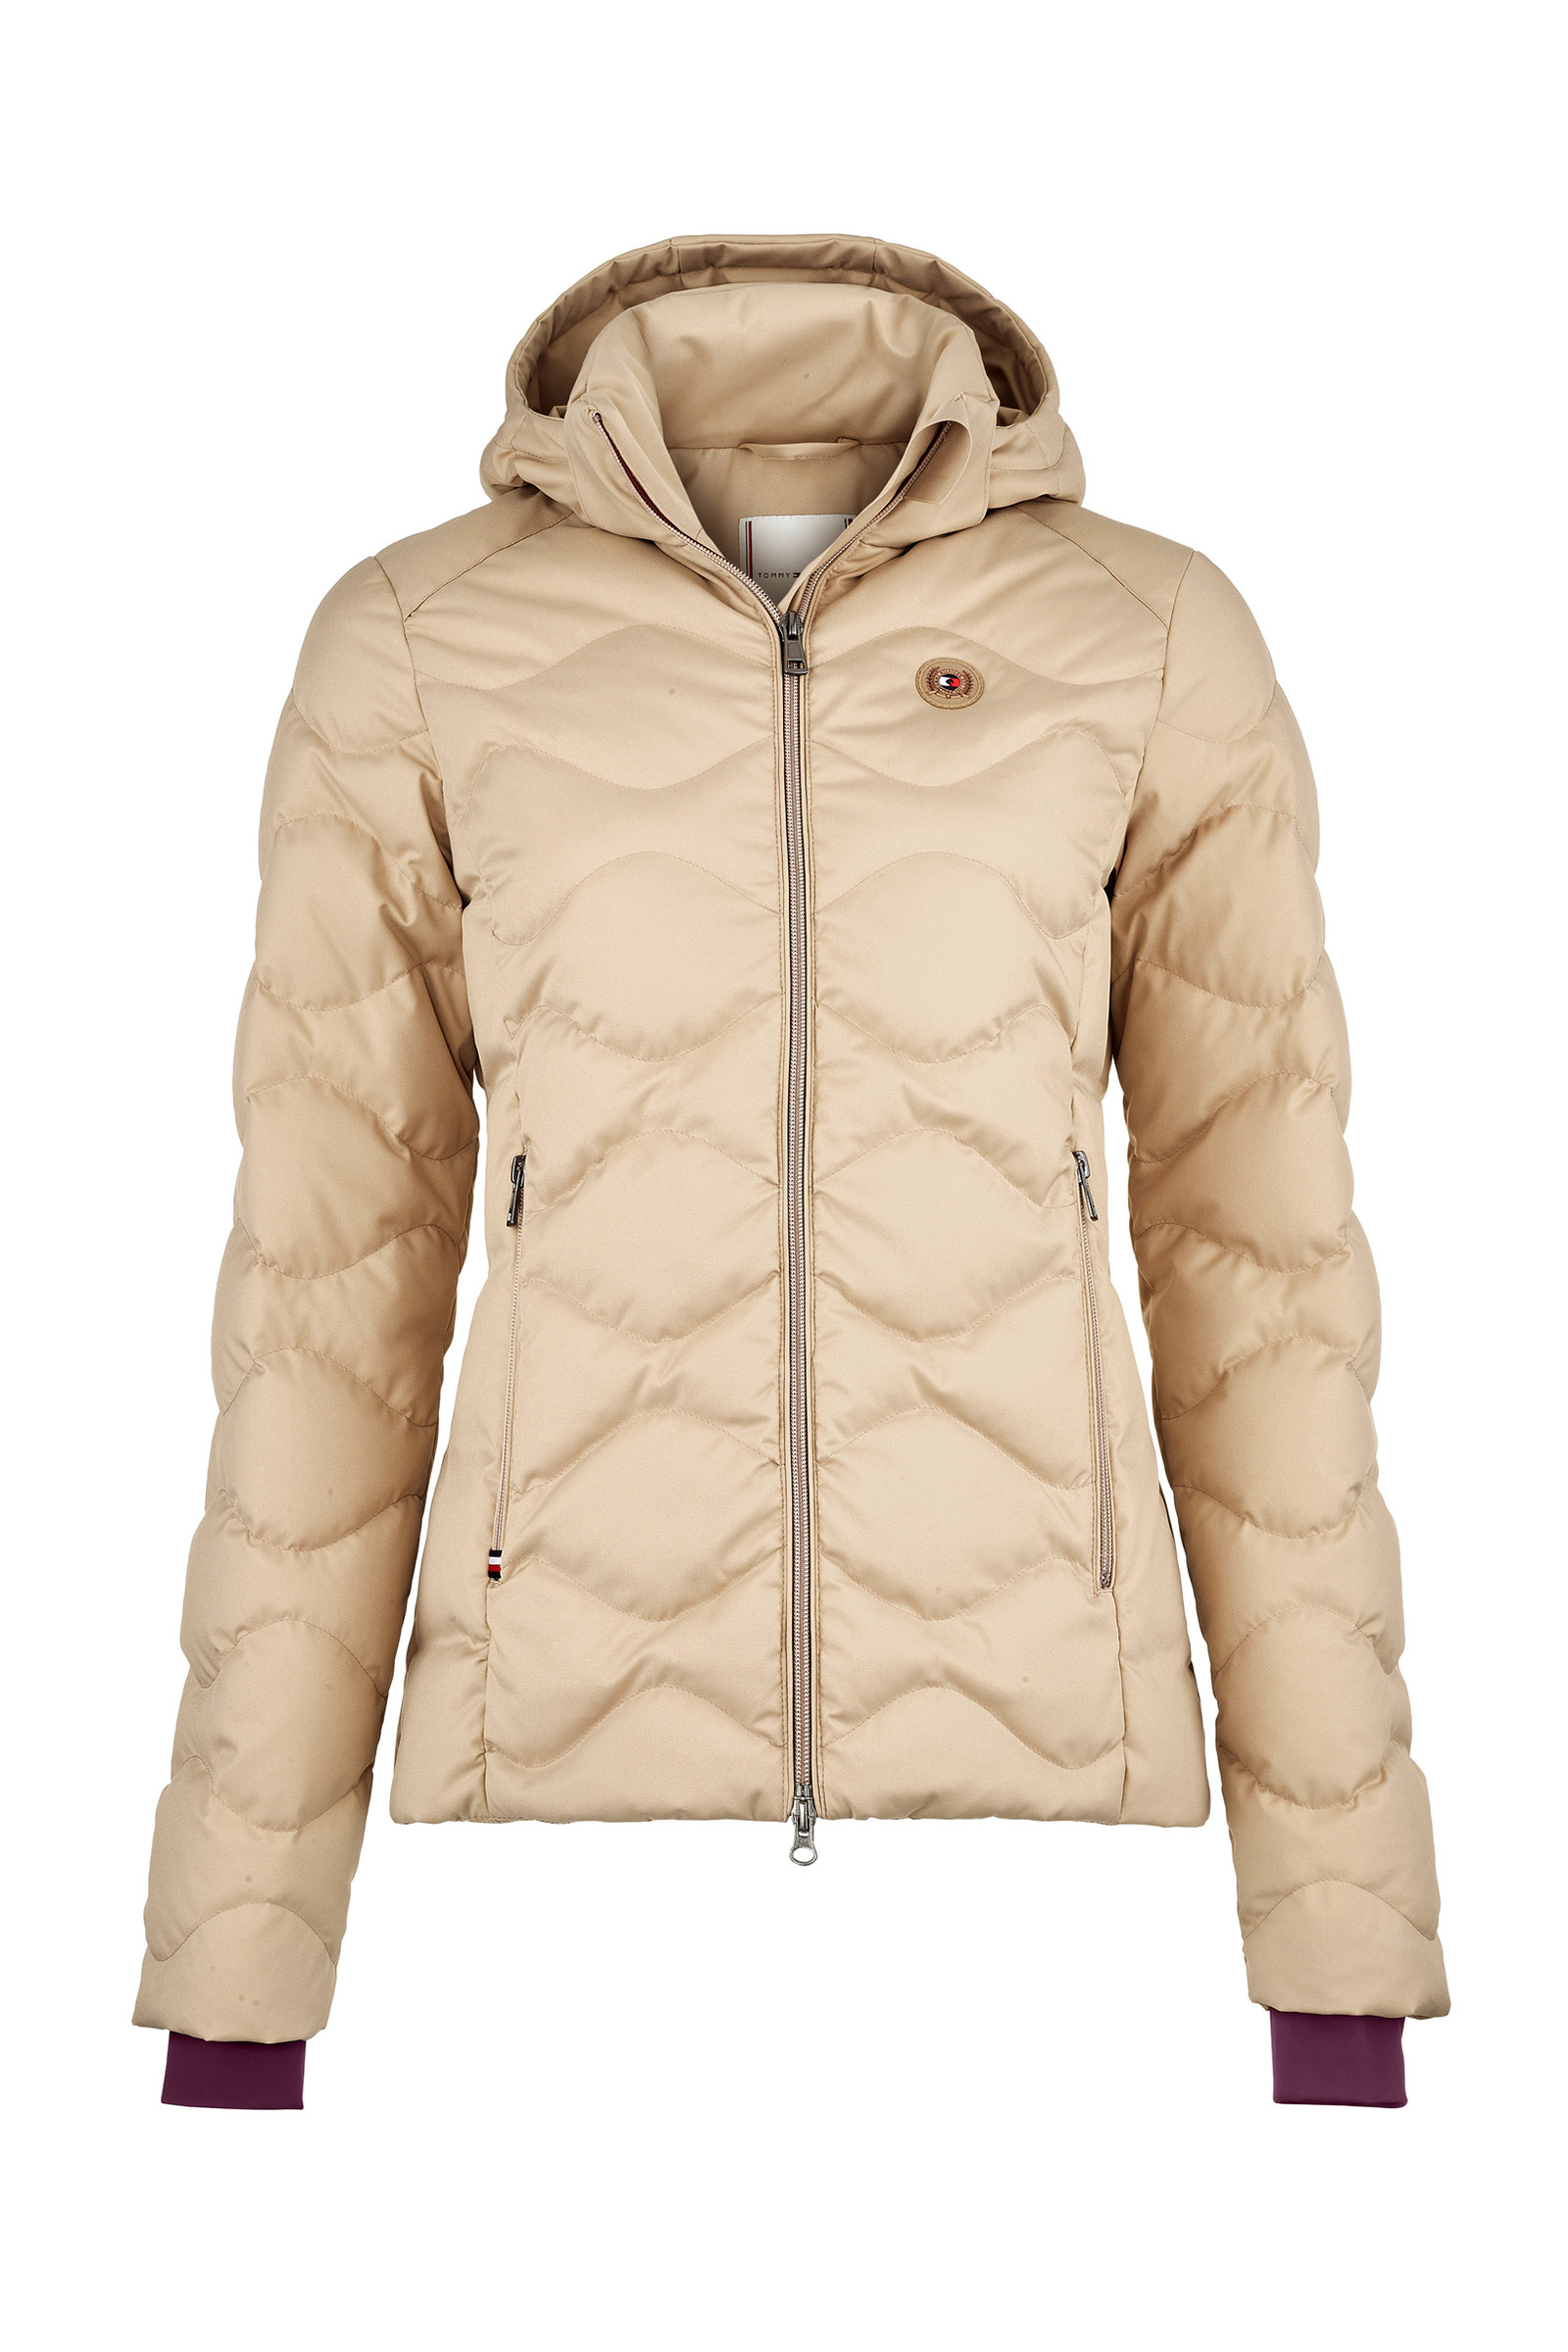 Buy Tommy Hilfiger Equestrian Mid-Weight Women's Re-Down Jacket